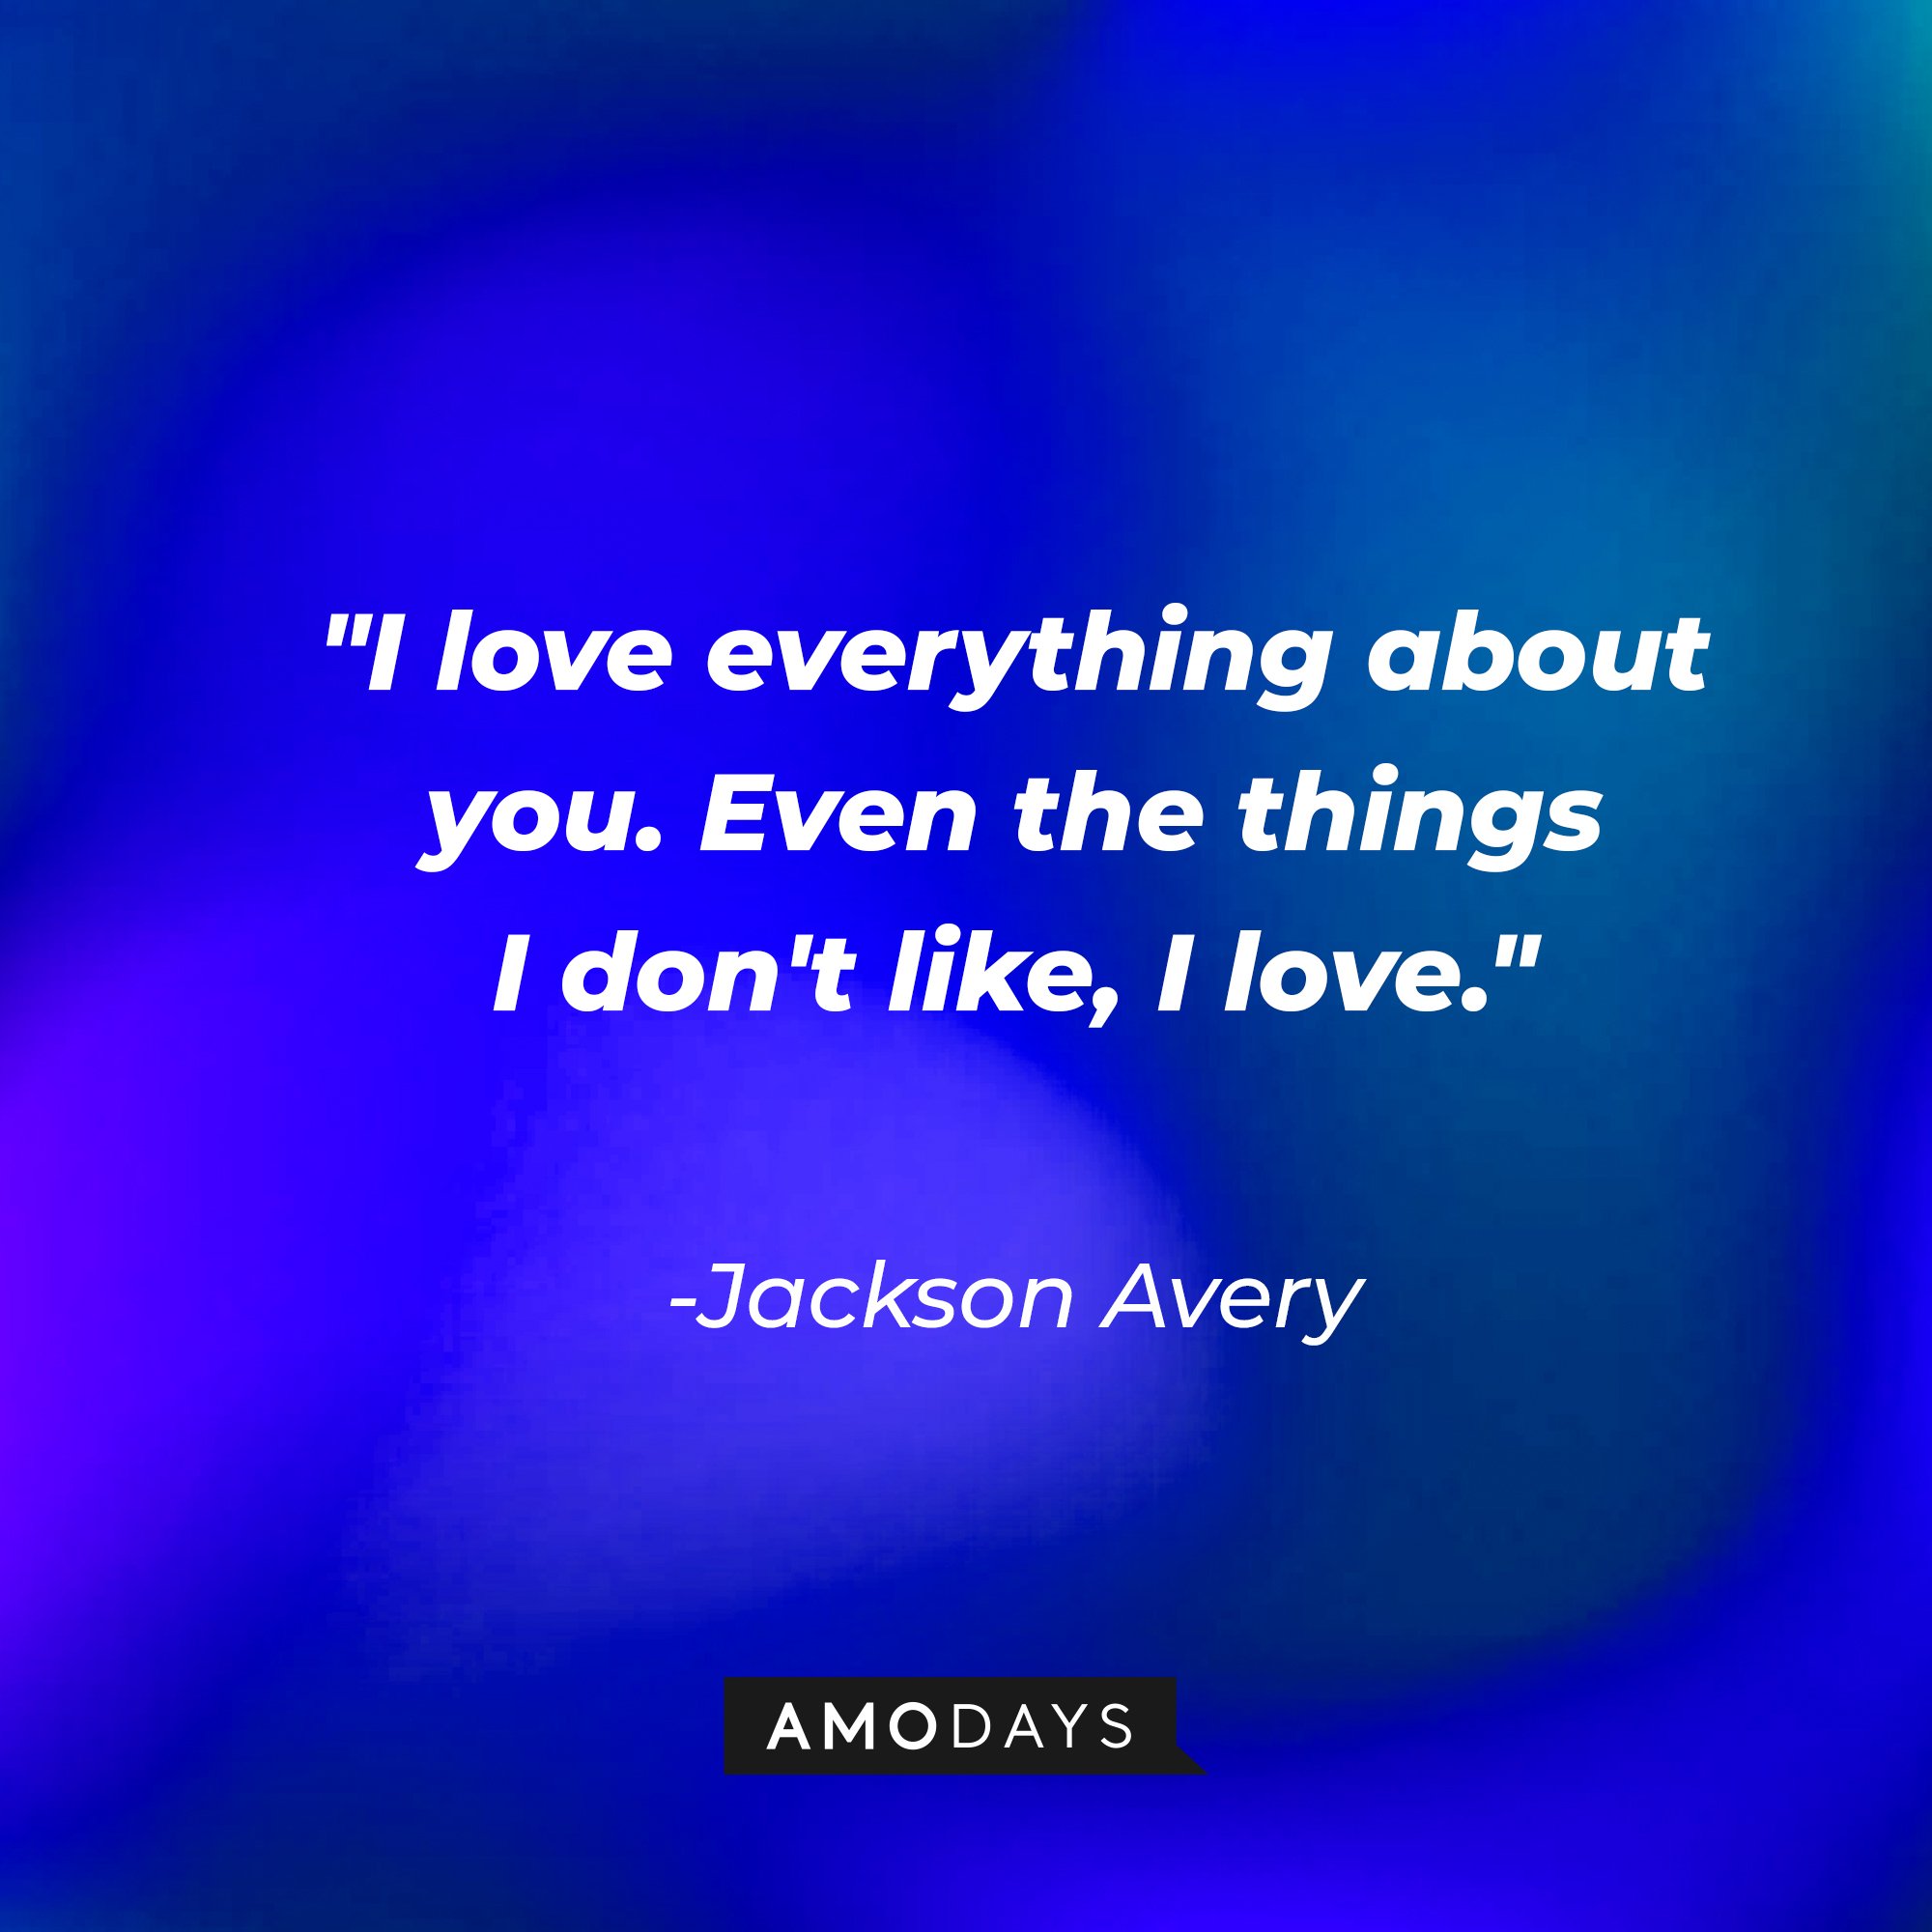 Jackson Avery’s quote: "I love everything about you. Even the things I don't like, I love."  |Source: AmoDays